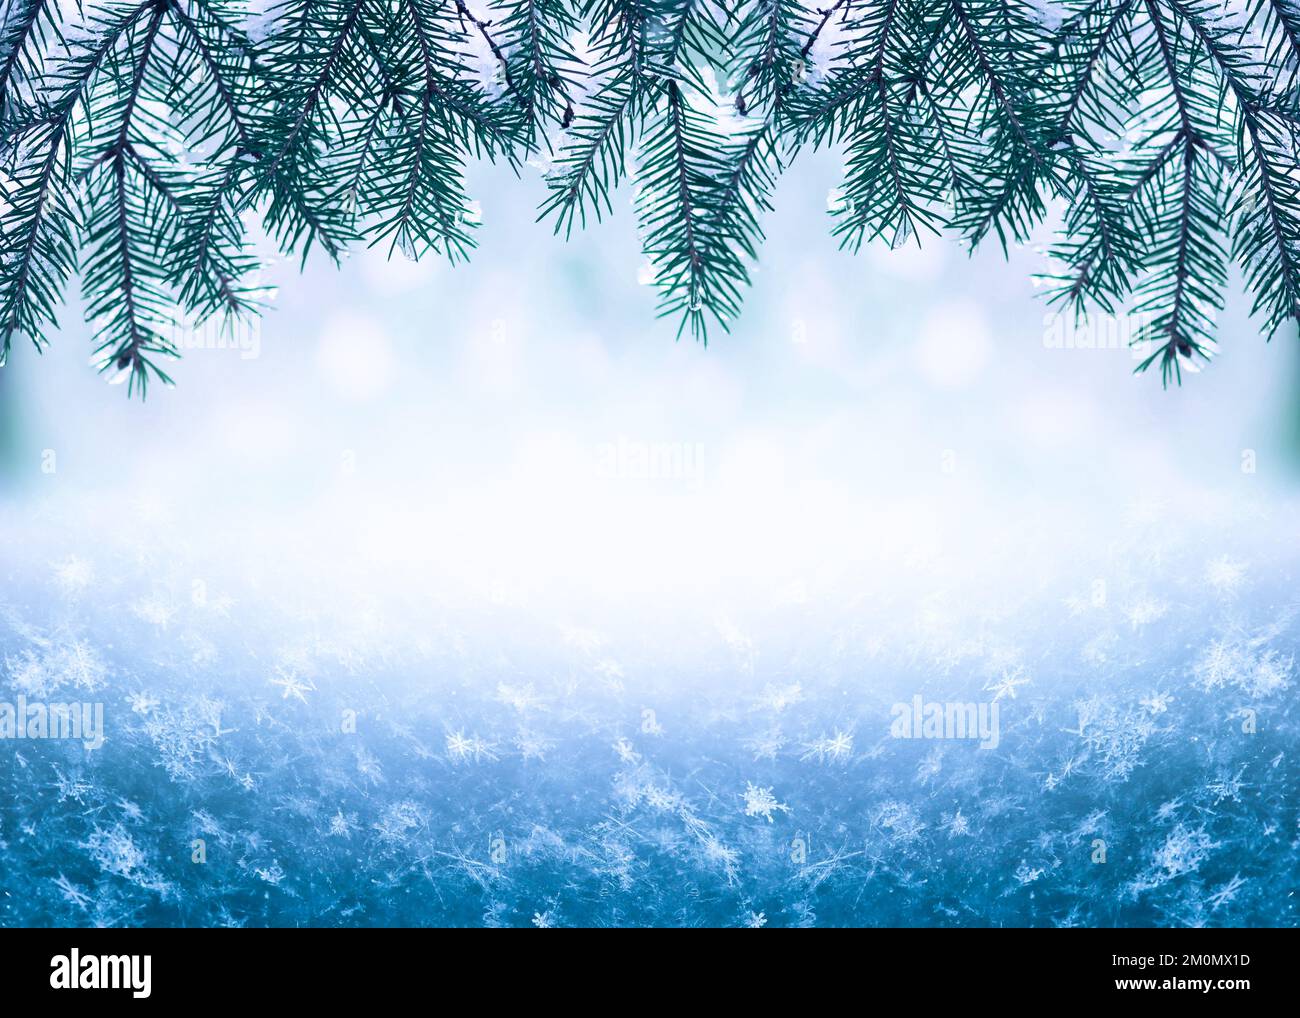 Winter Christmas background with snowy fir tree branches and frozen snow snowflakes heap. Winter Holidays card design Stock Photo